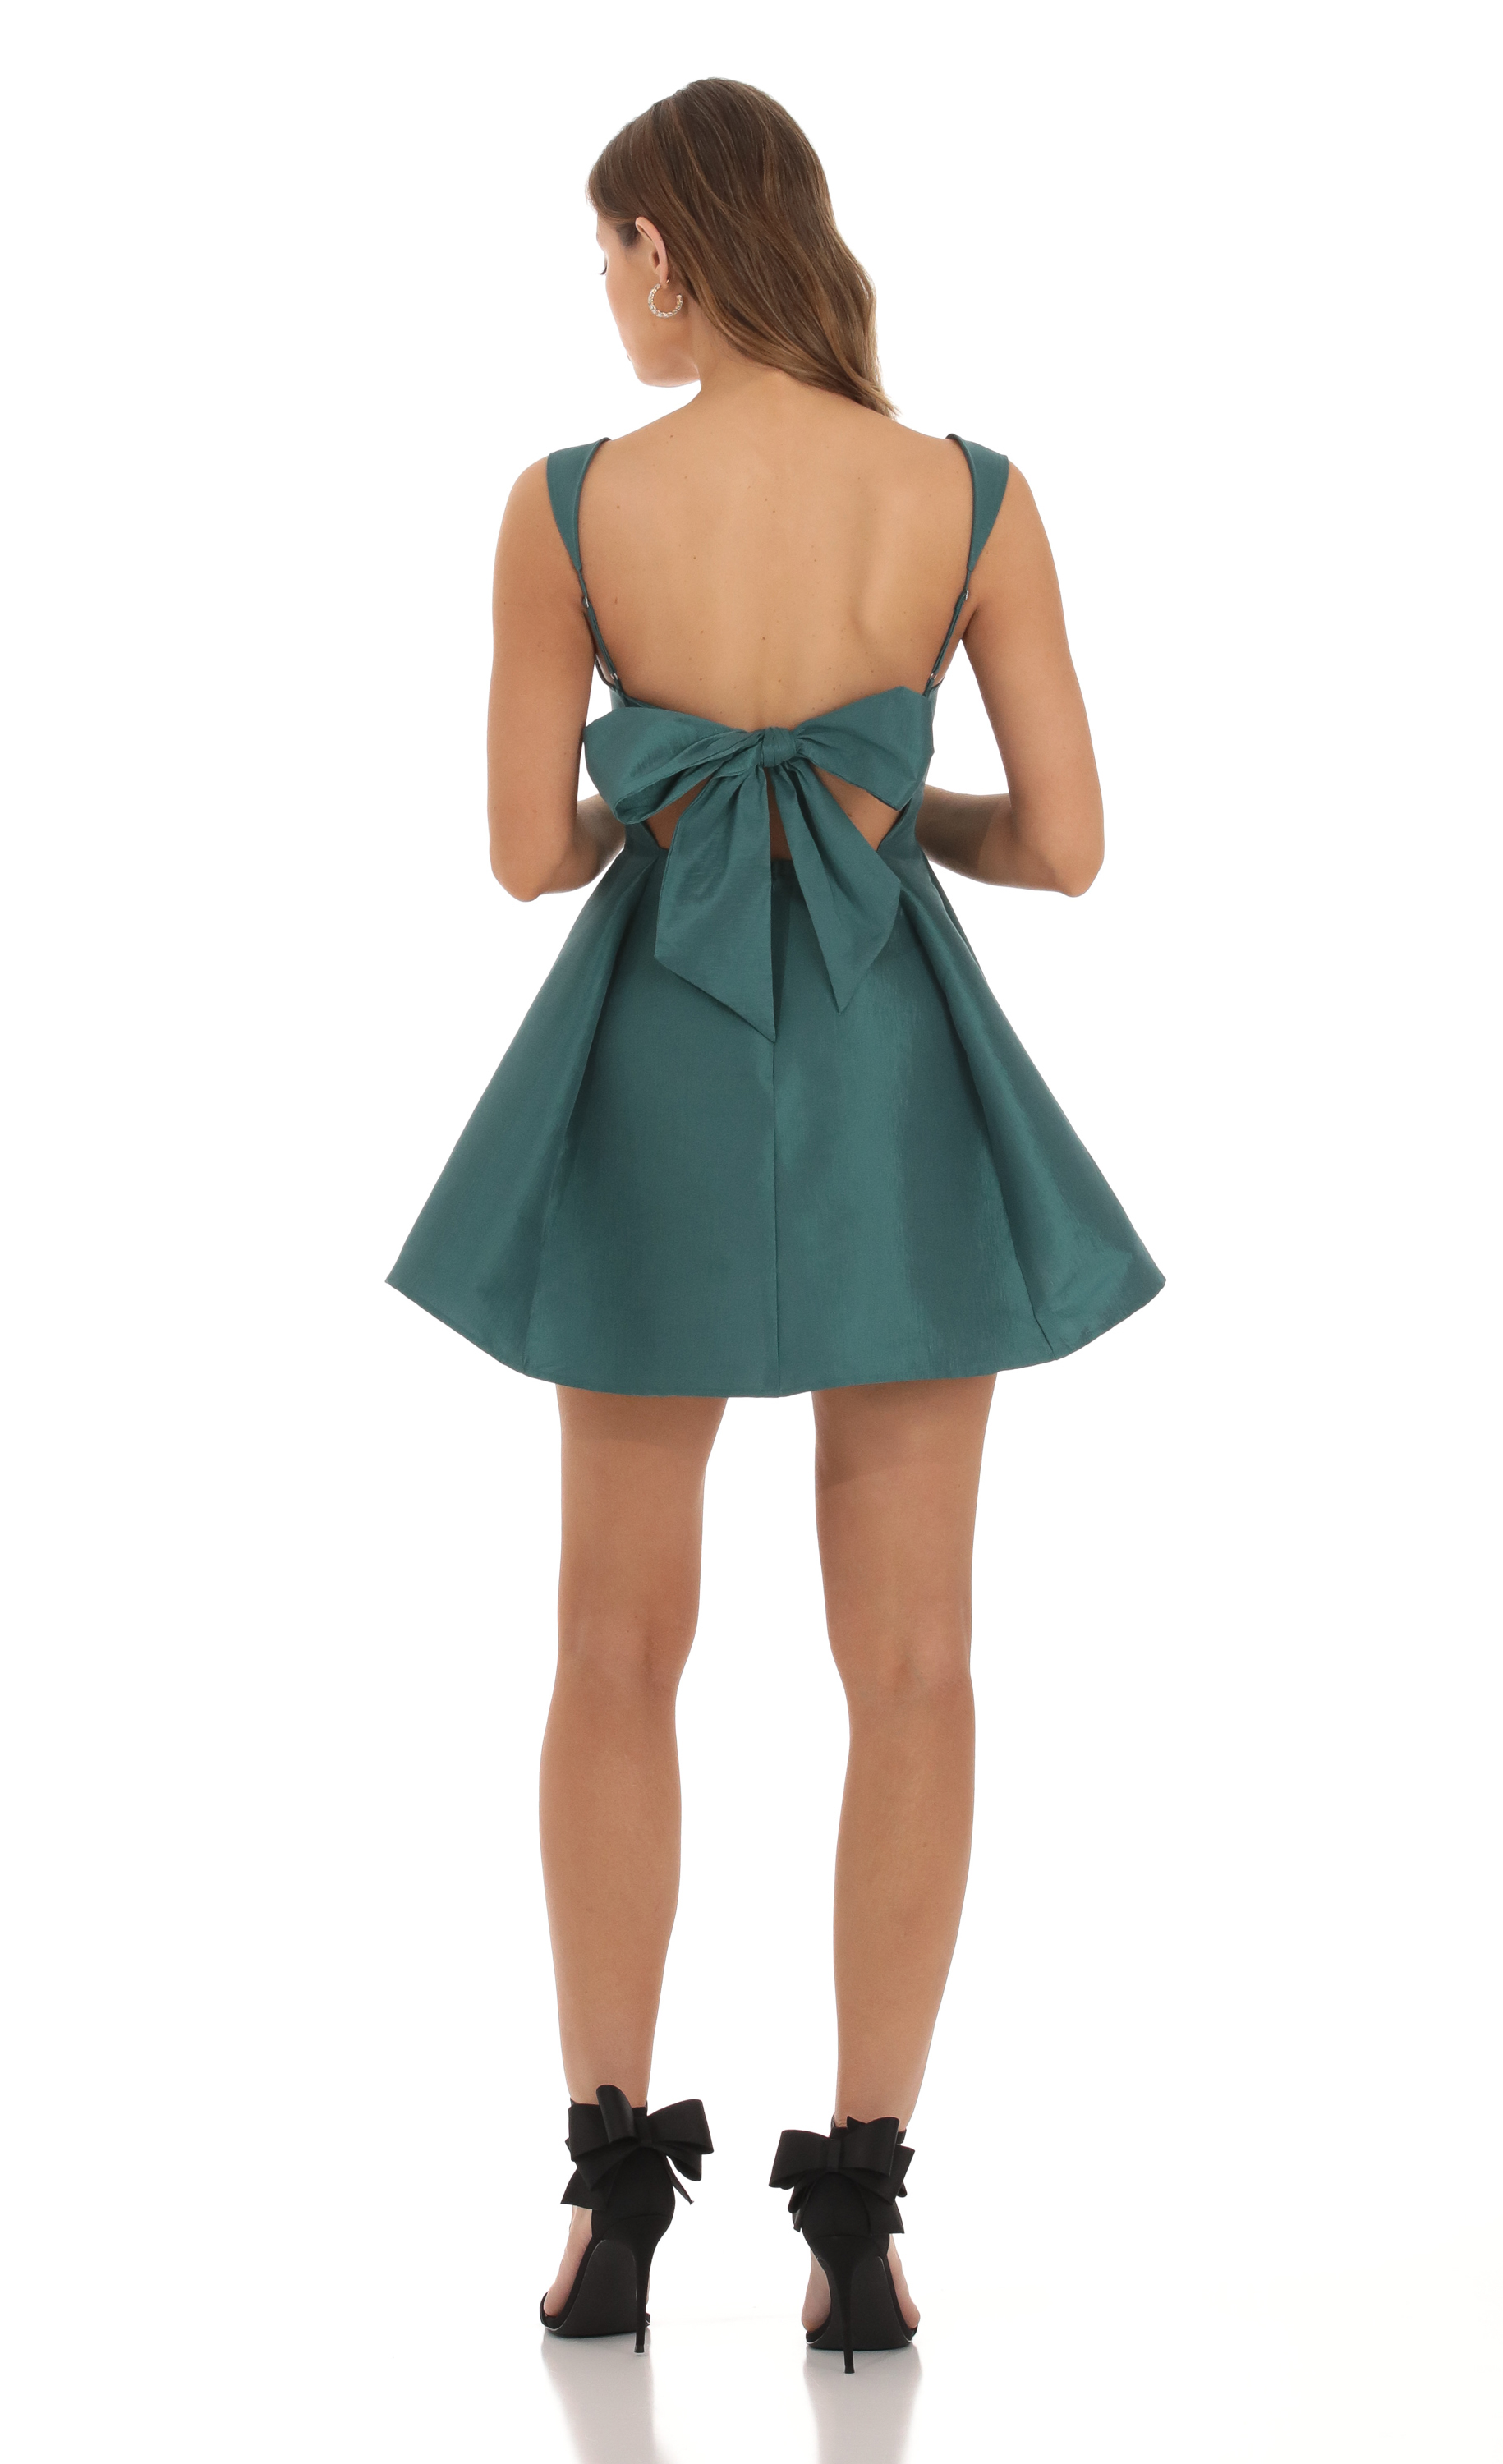 Foxie Taffeta Fit and Flare Dress in Teal